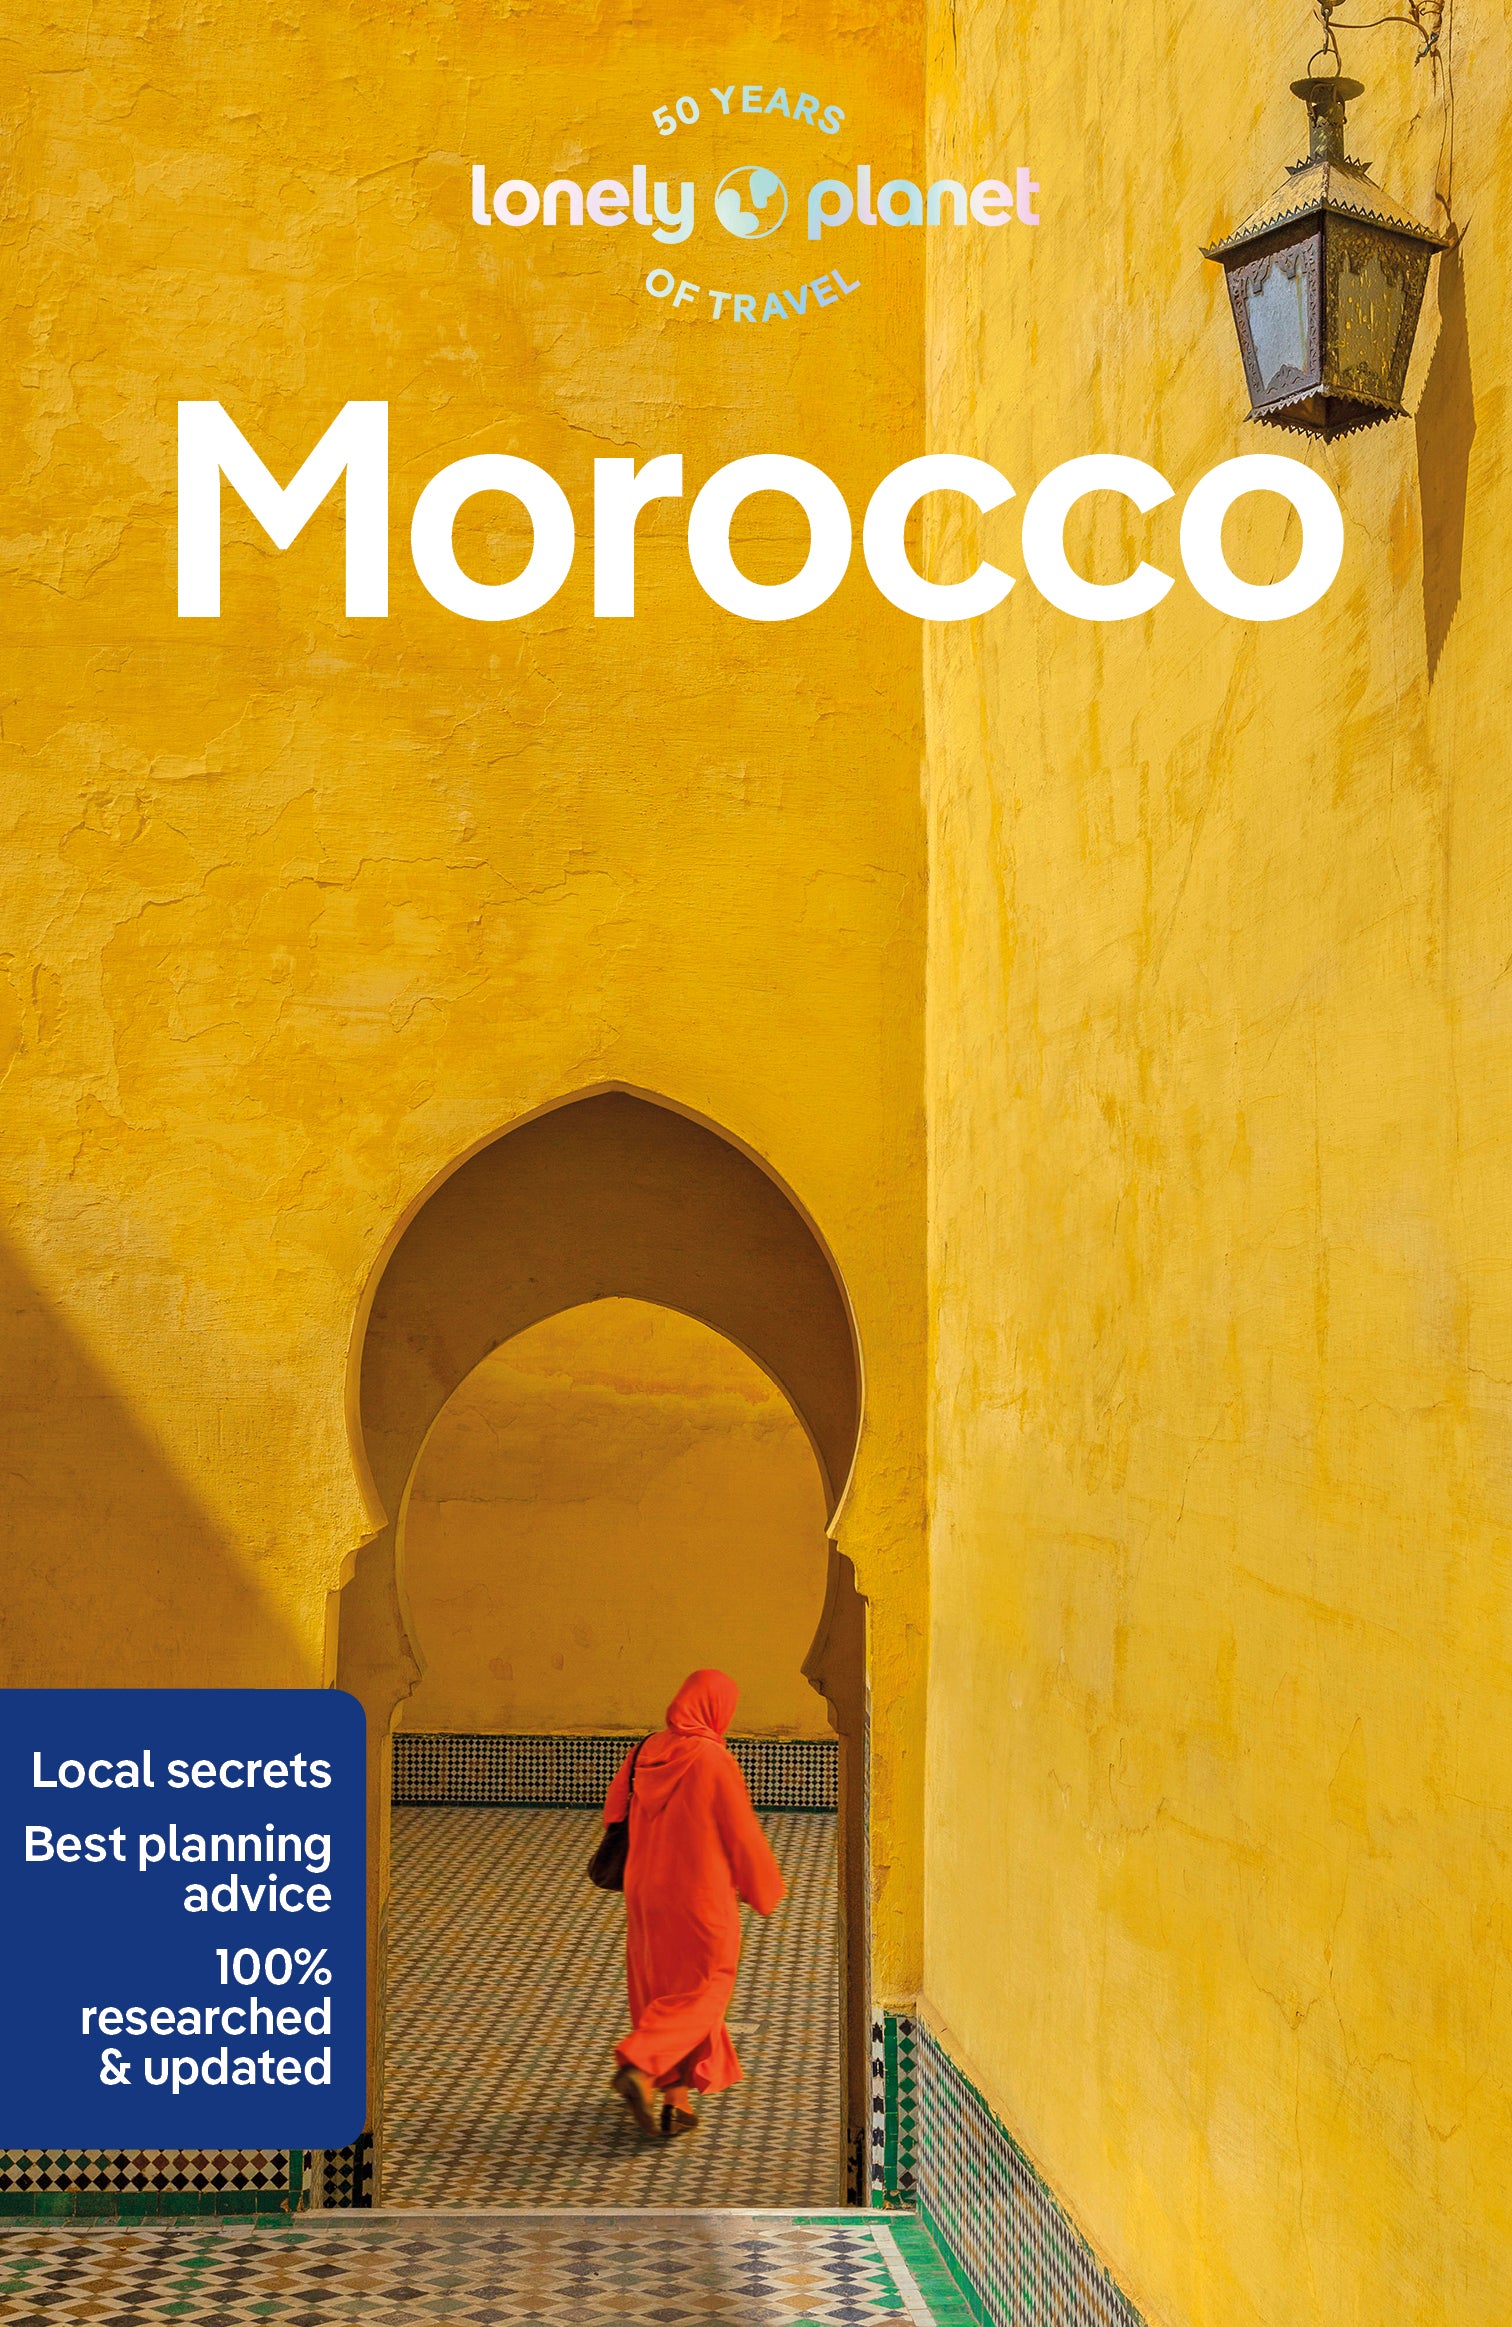 The Travel Book (Paperback) - Lonely Planet Online Shop